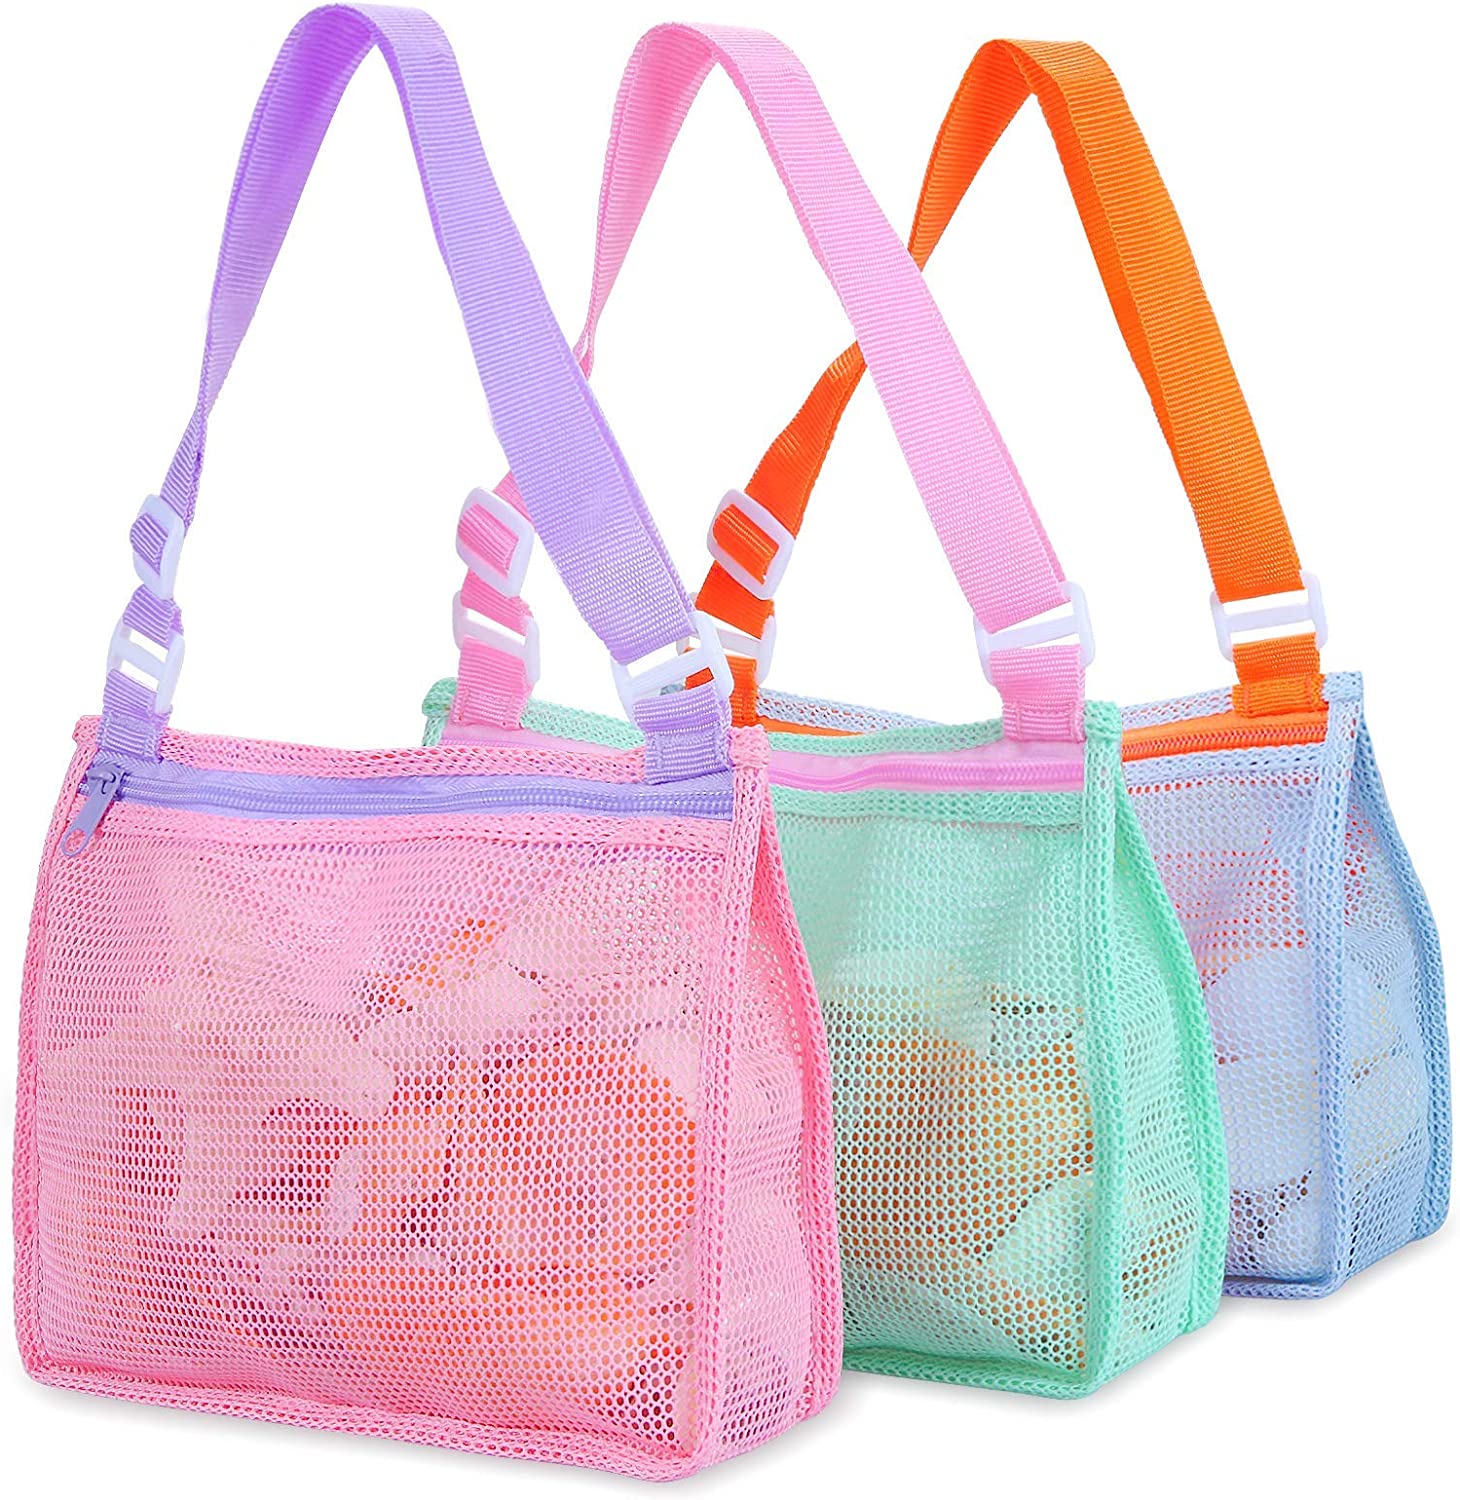 Tagitary Zippered Mesh Beach Bags For Kids, 3-Pack